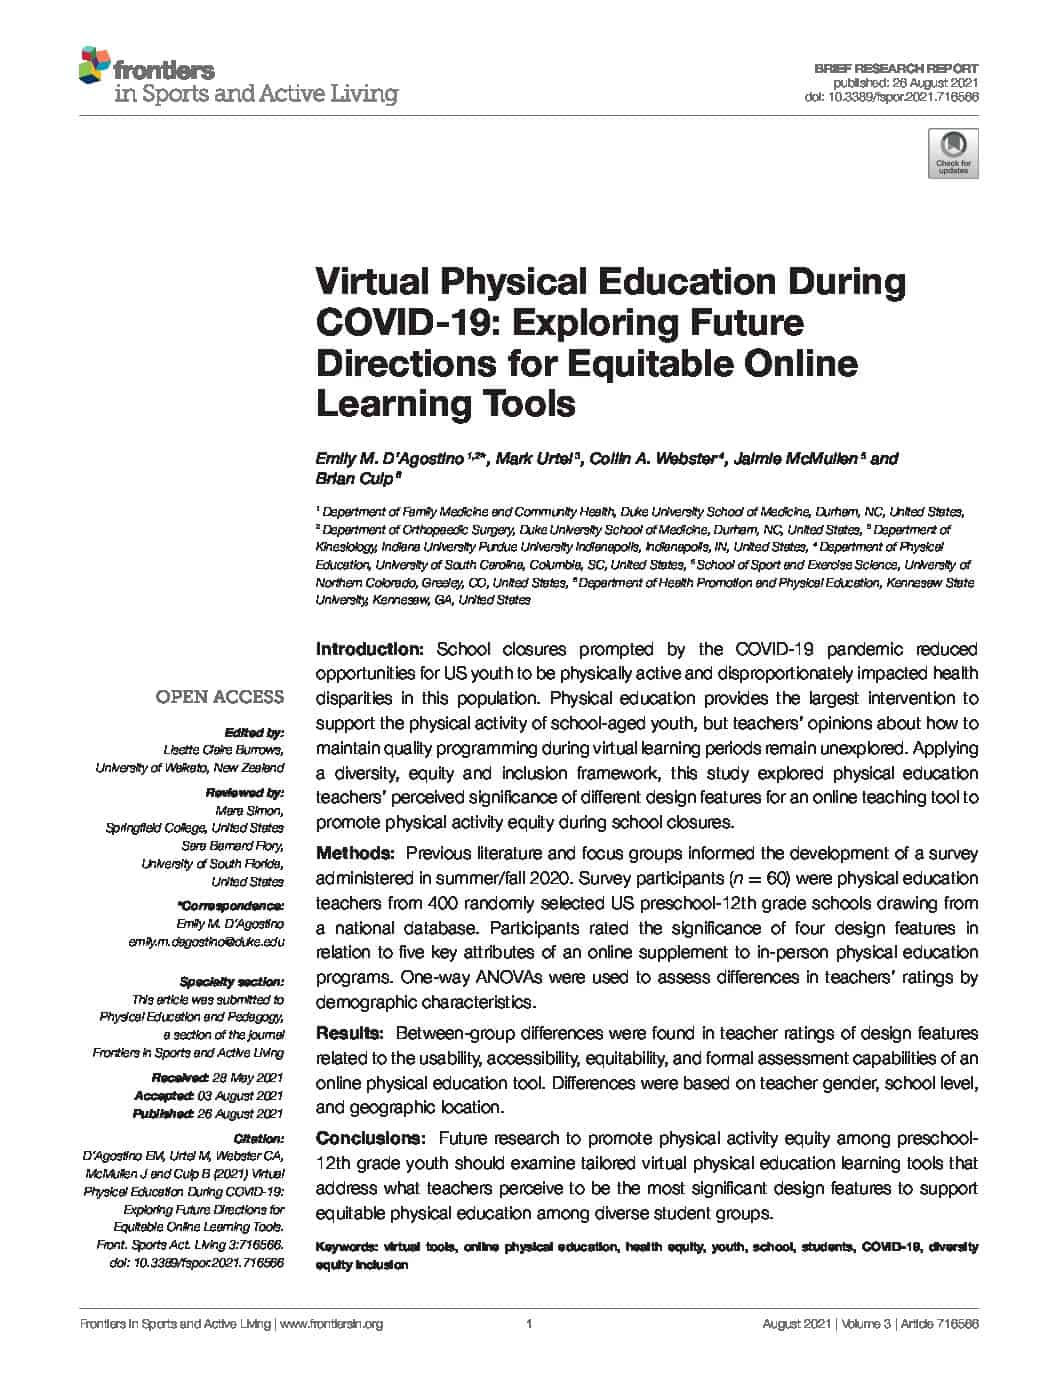 Virtual Physical Education During COVID-19: Exploring Future Directions for Equitable Online Learning Tools